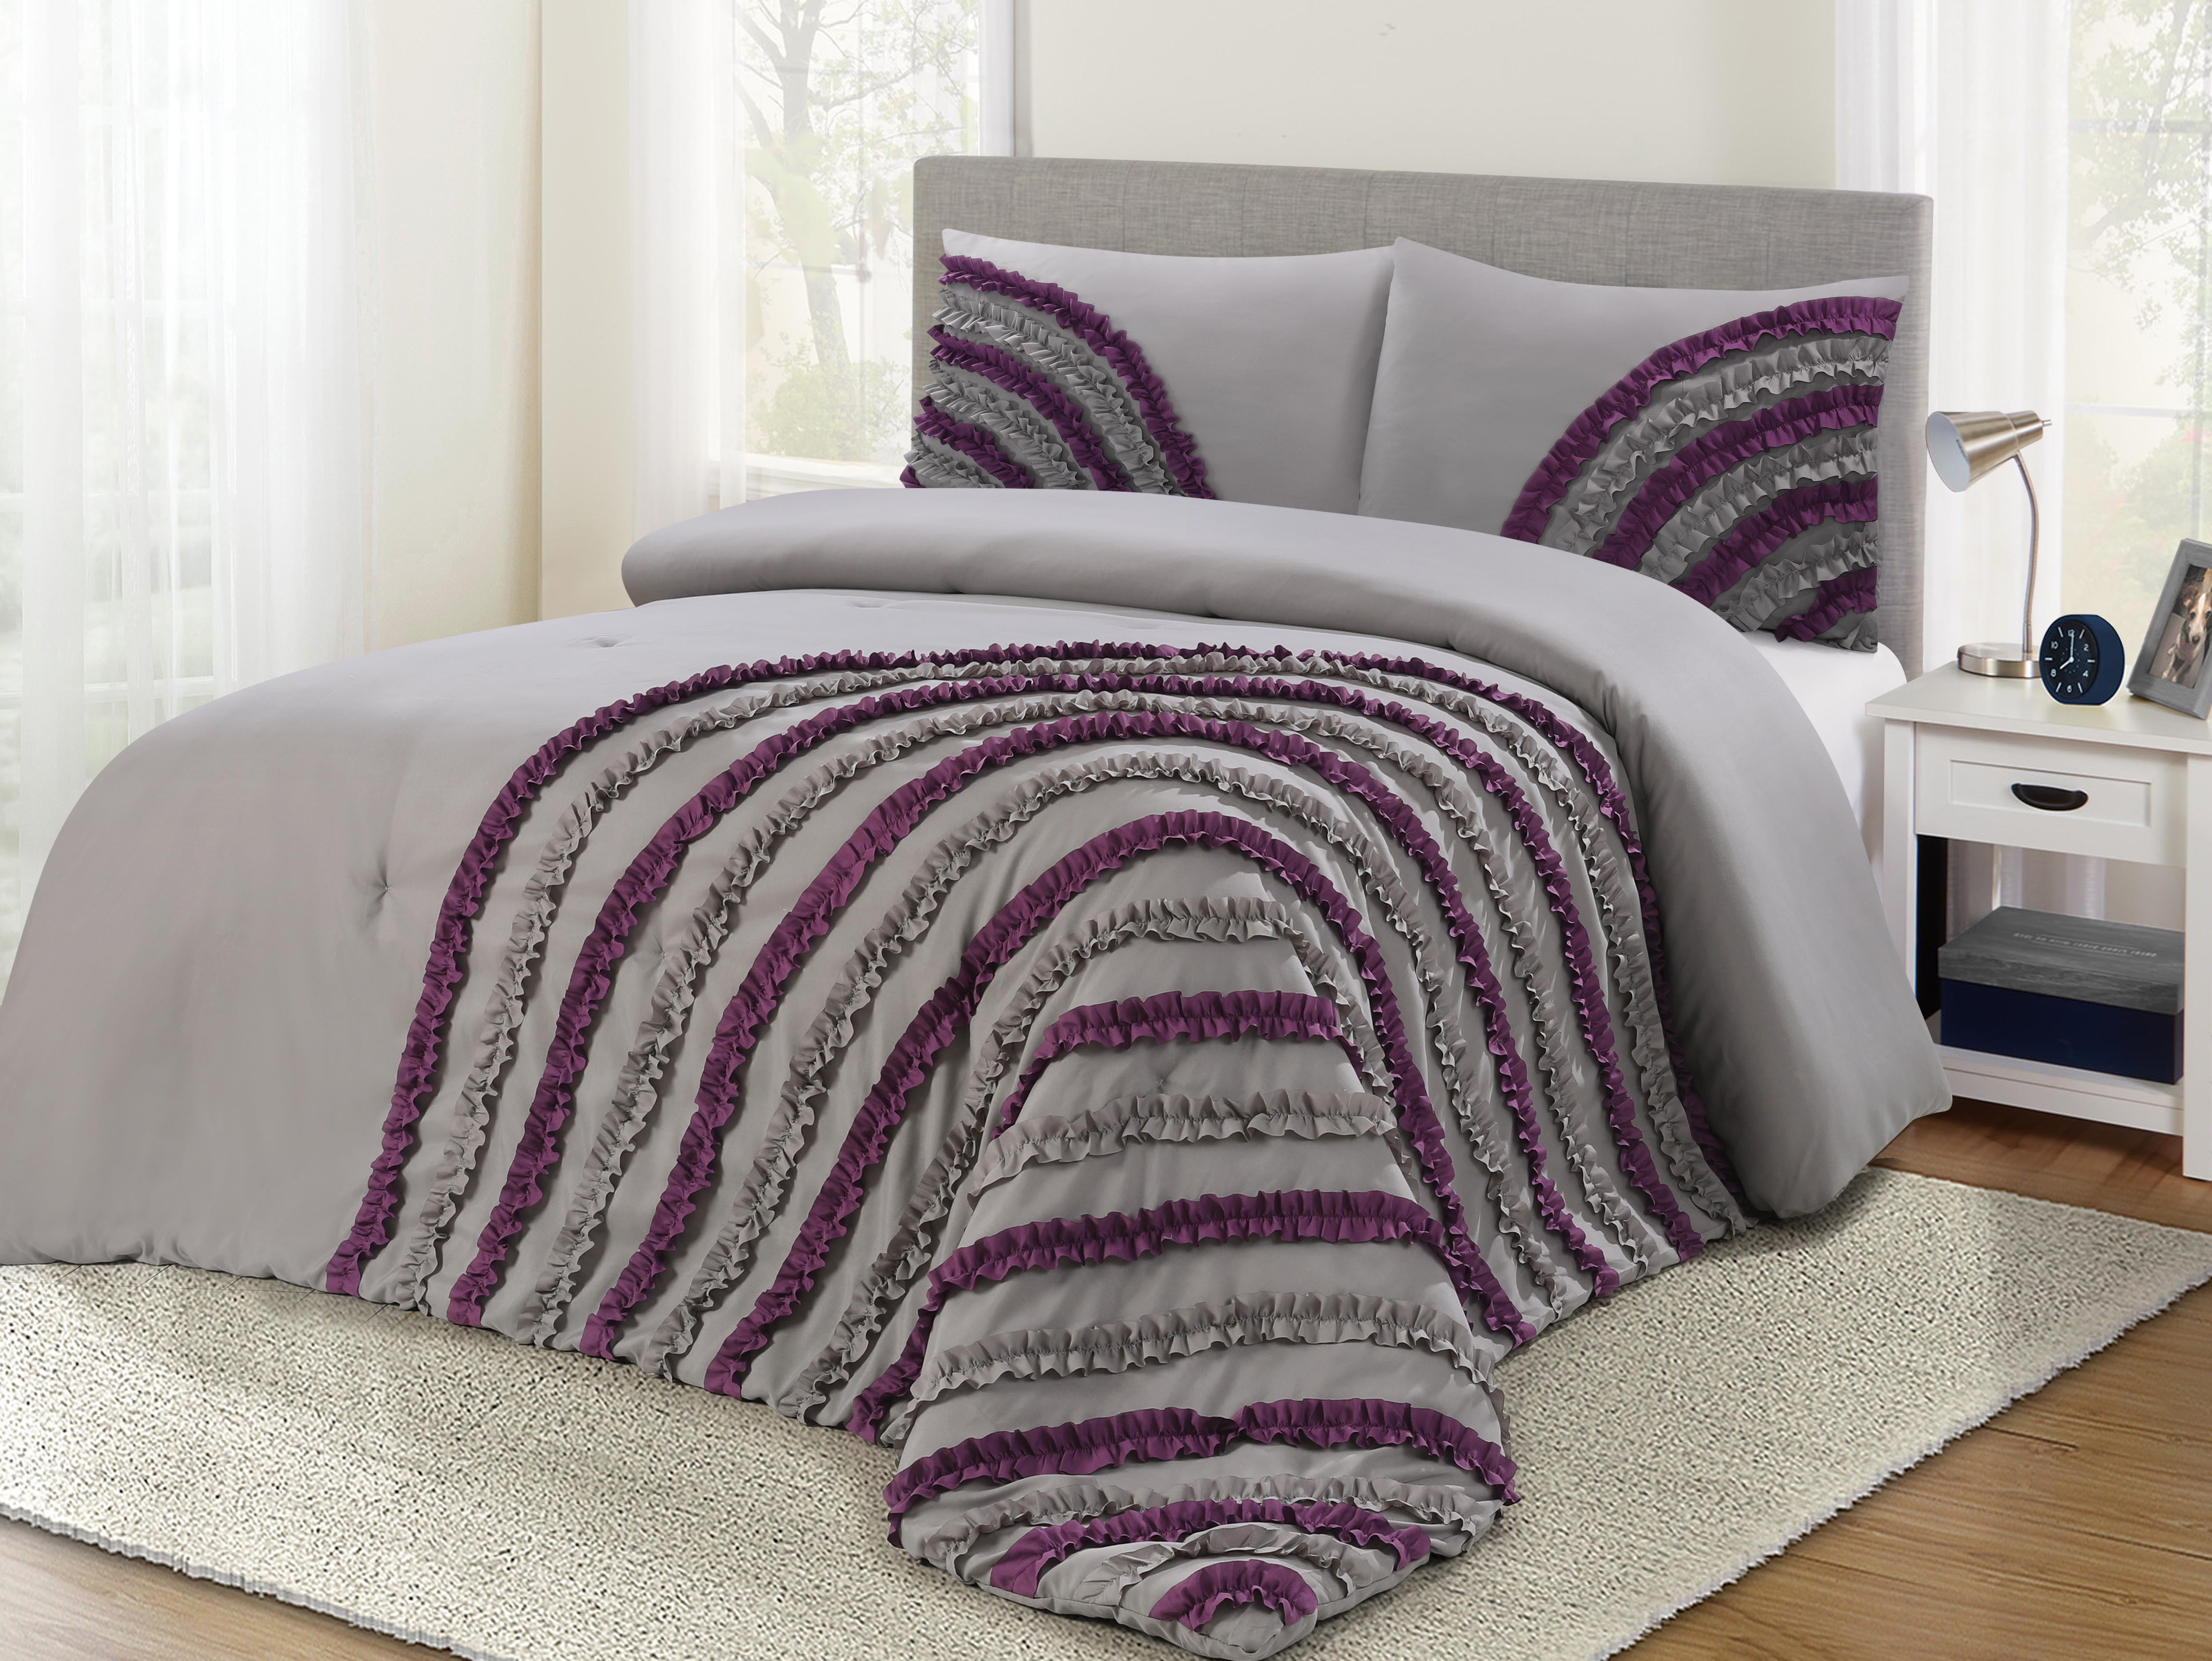 3 Piece Gray/Purple Queen Comforter set with Handcrafted Ruffle Fan ...